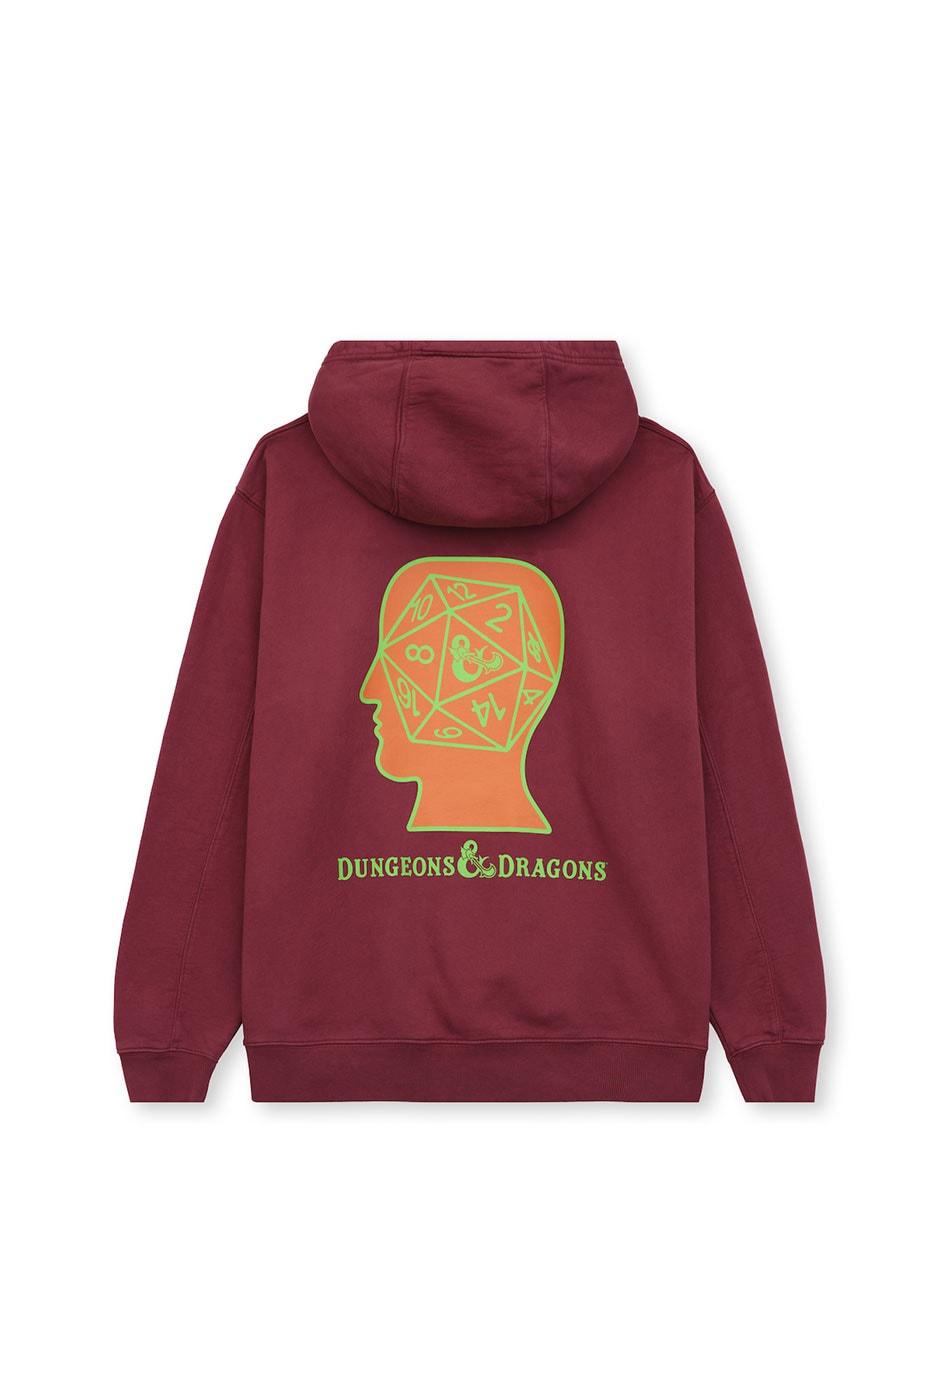 Brain Dead Dungeon And Dragons Capsule Collection Release Buy Info Dover Street Market Hoodies Tshirts Beanie Cap